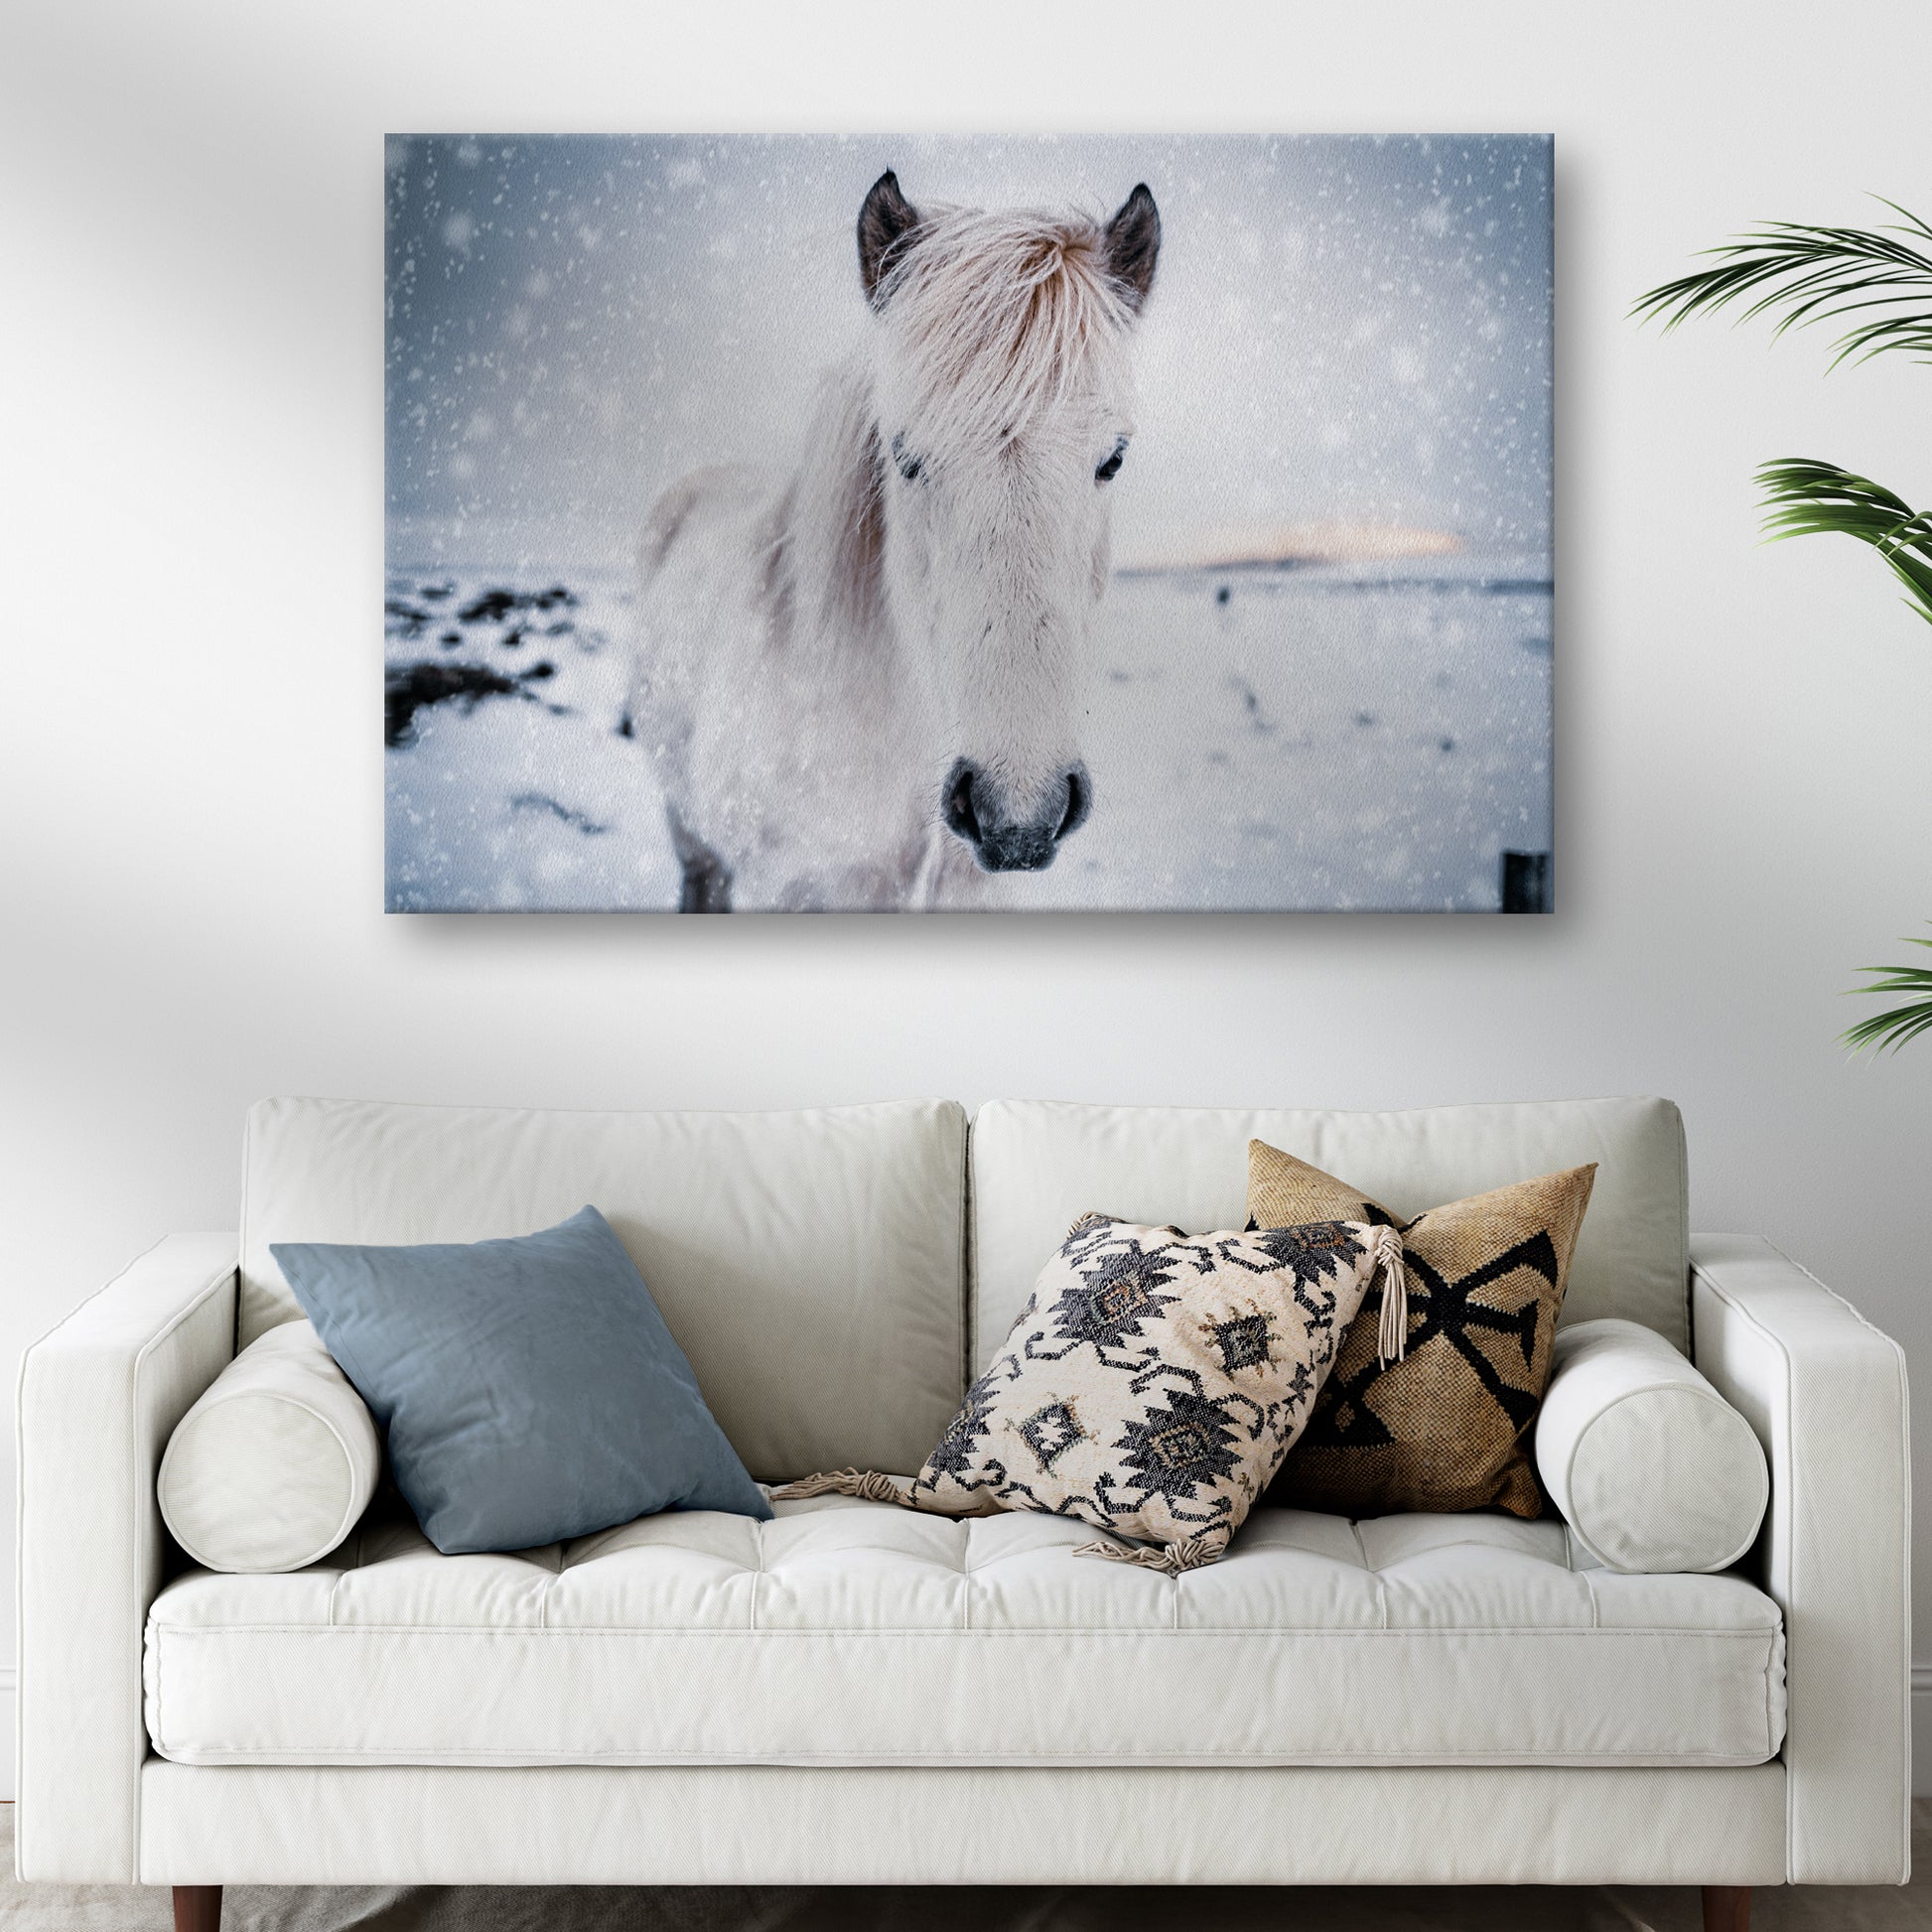 Winter White Horse Canvas Wall Art - Image by Tailored Canvases